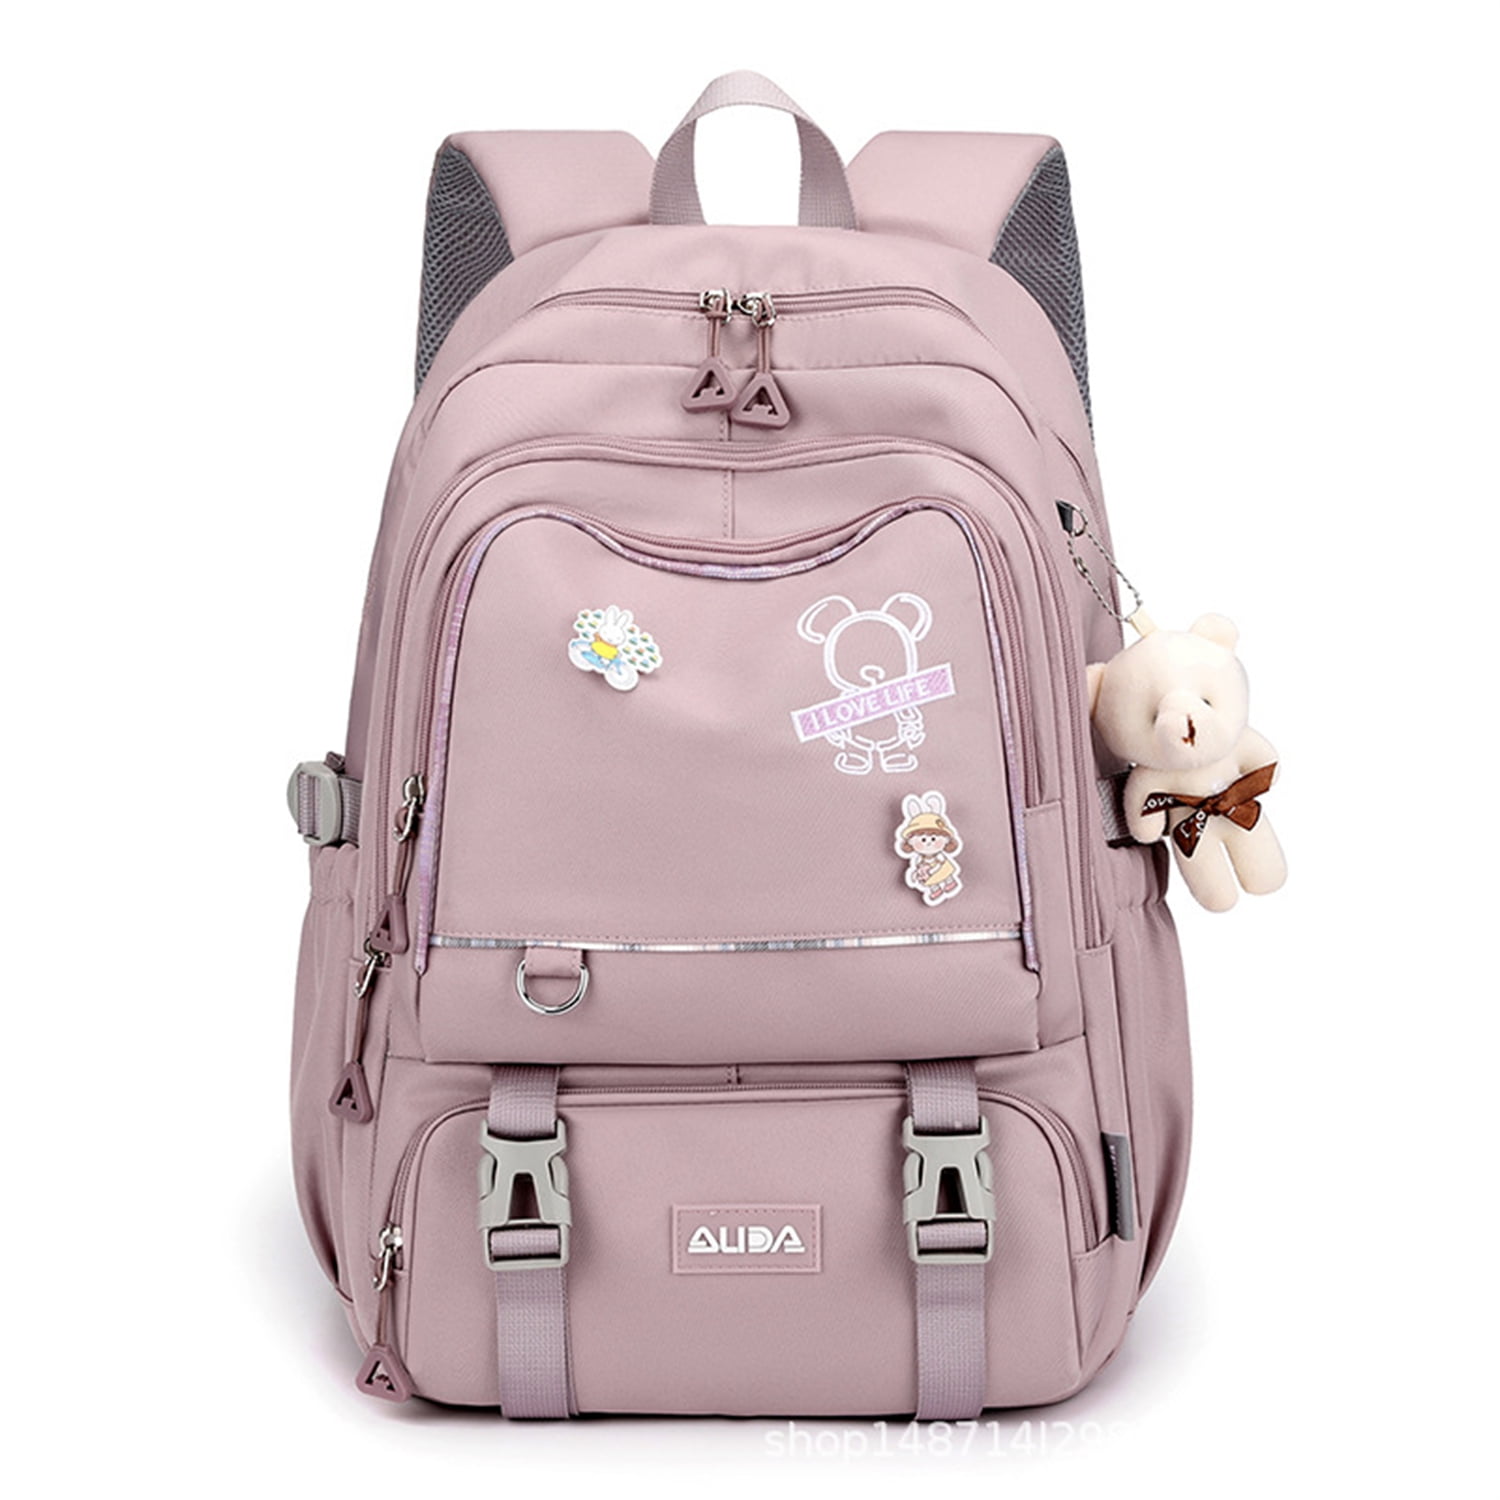 Reflective Fashion Backpack Women School Bag For Teenage Girls College  Campus Style New Trendy Stylish Escolar Book Bag Ladies X0529 From Musuo07,  $18.5 | DHgate.Com